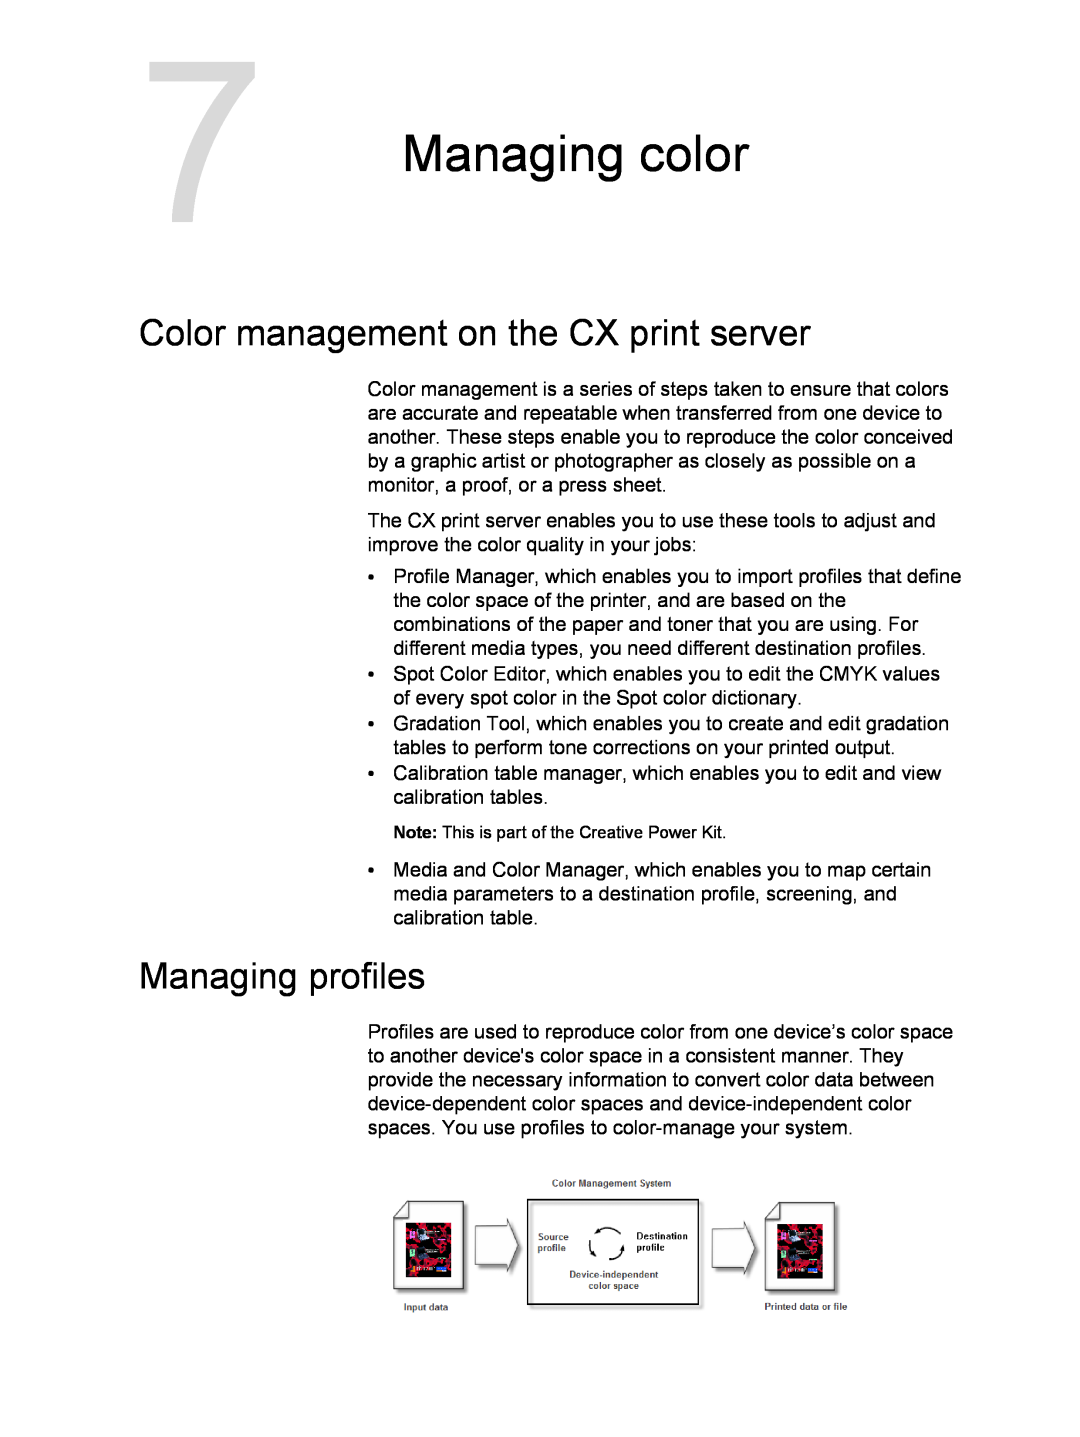 Xerox 550, 560 manual Managing color, Color management on the CX print server, Managing profiles 